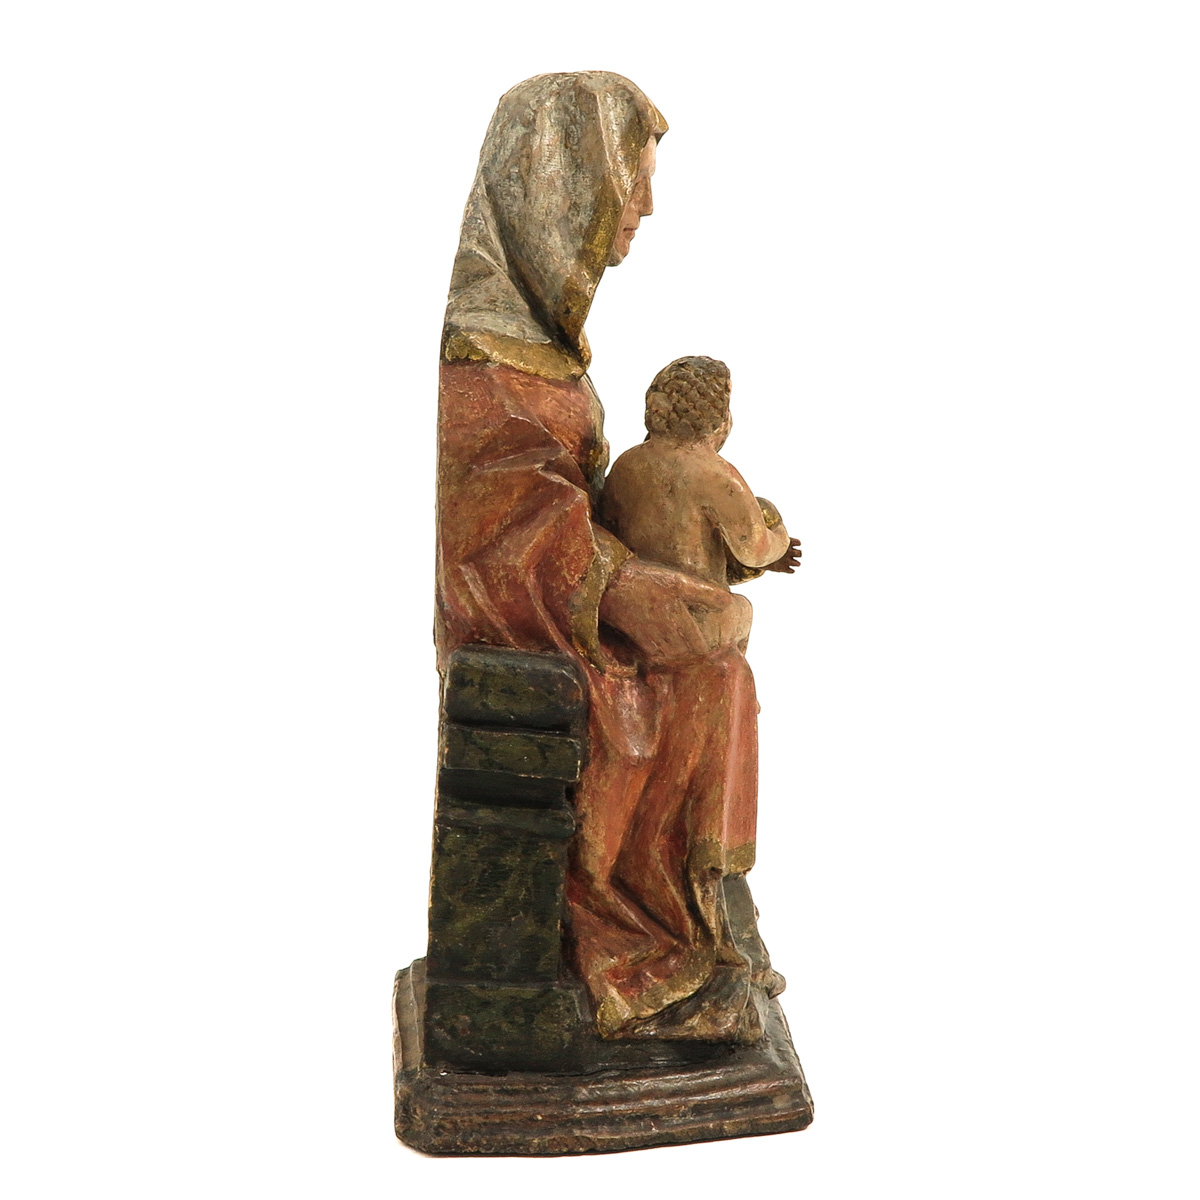 A 17th Century Religious Sculpture - Image 4 of 10